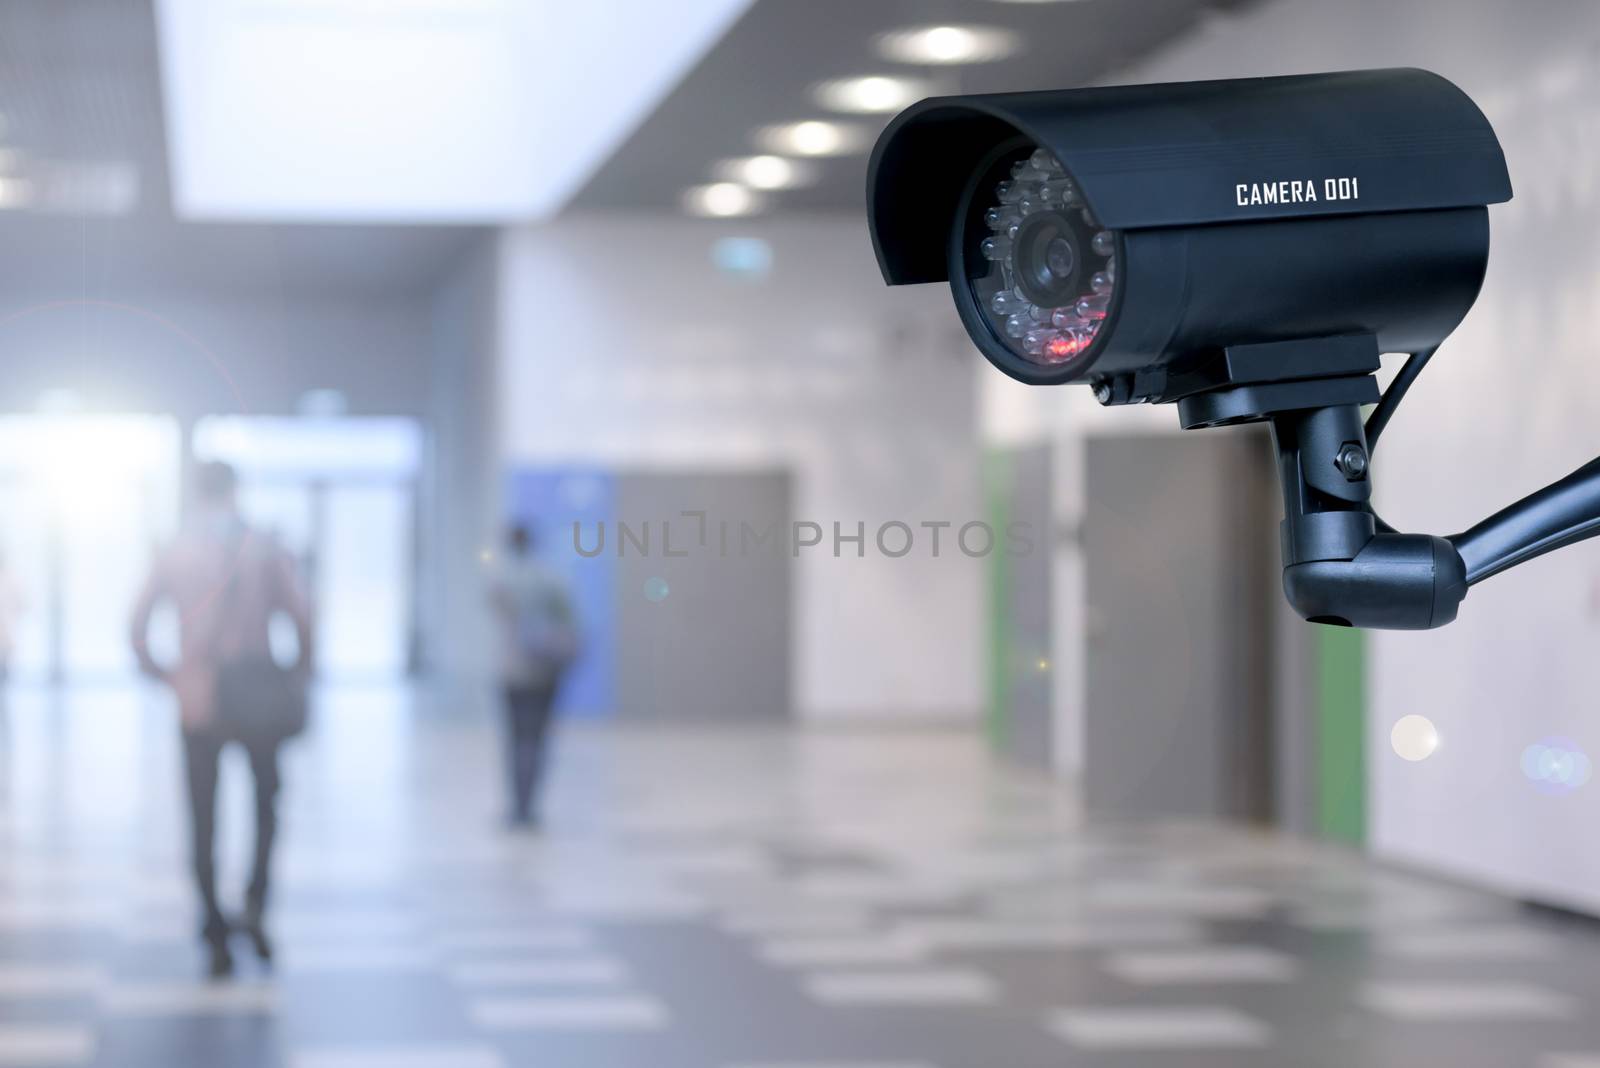 Security camera in the corporation by wdnet_studio